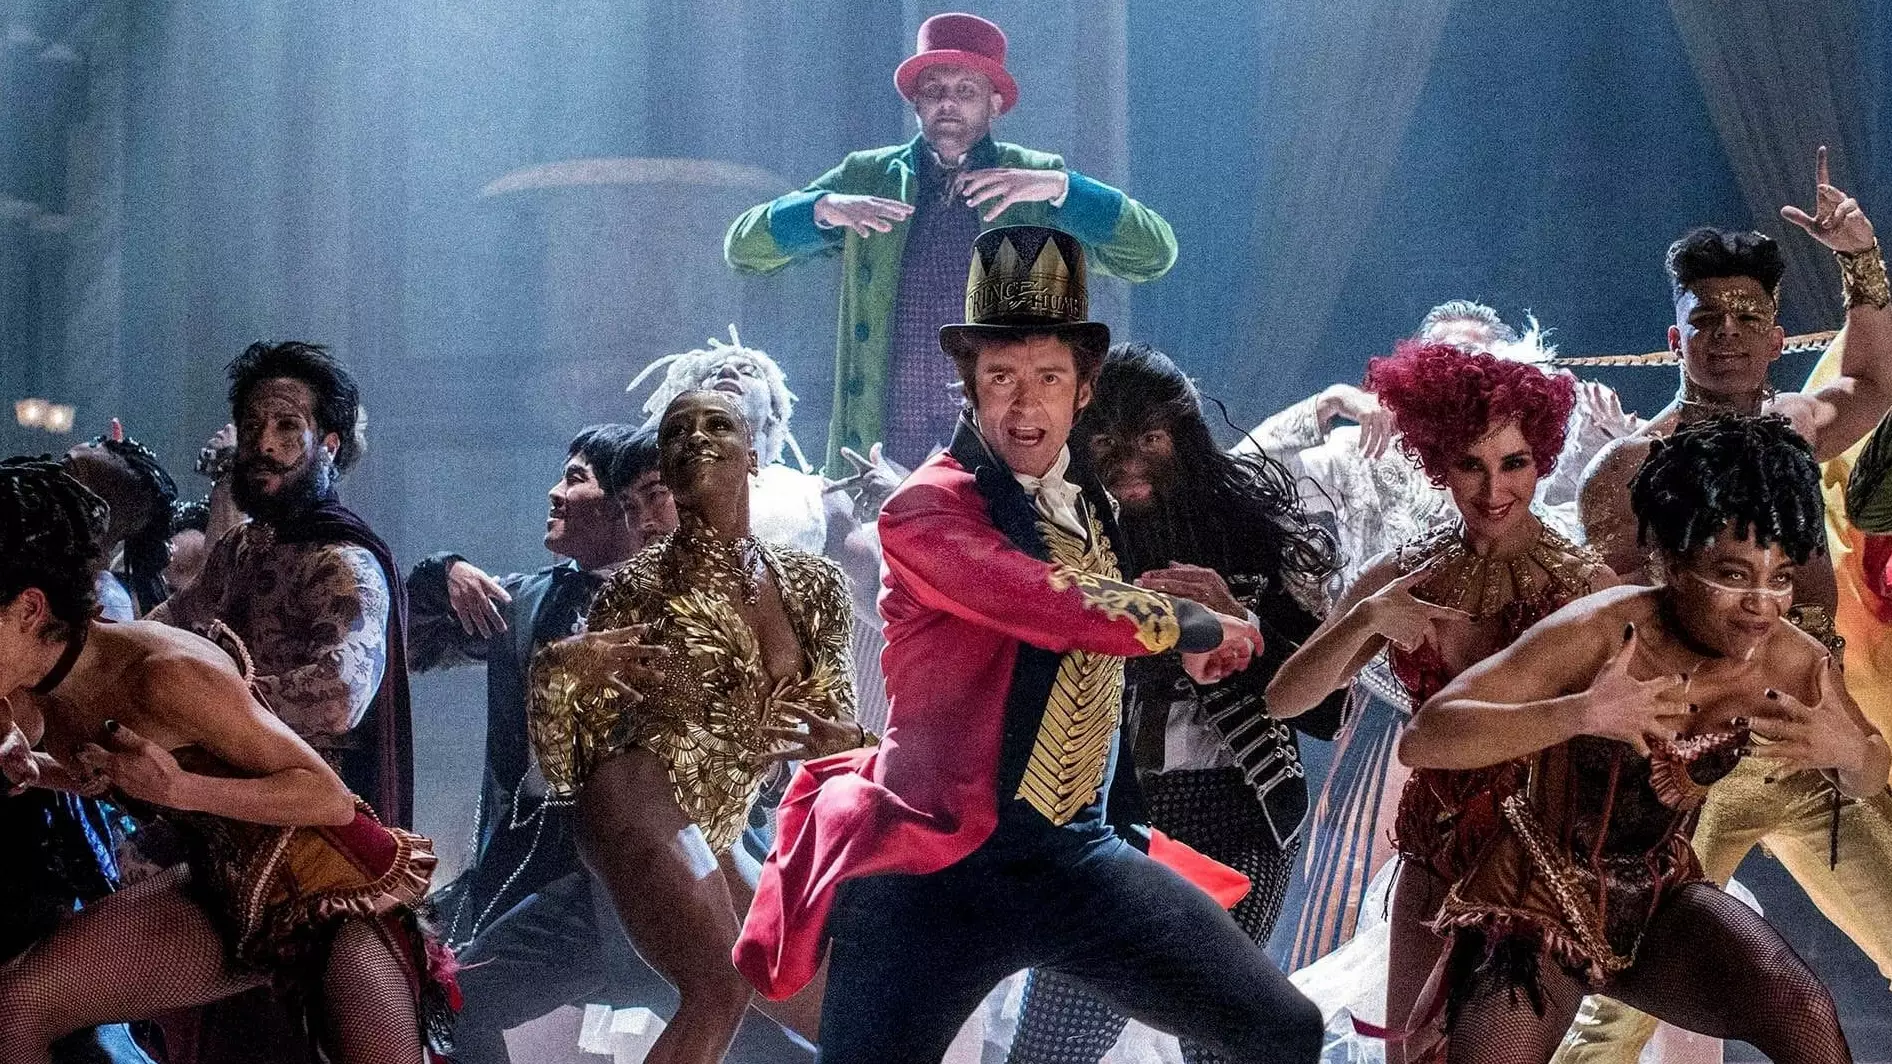 An Immersive 'The Greatest Showman' Experience Is Coming To The UK